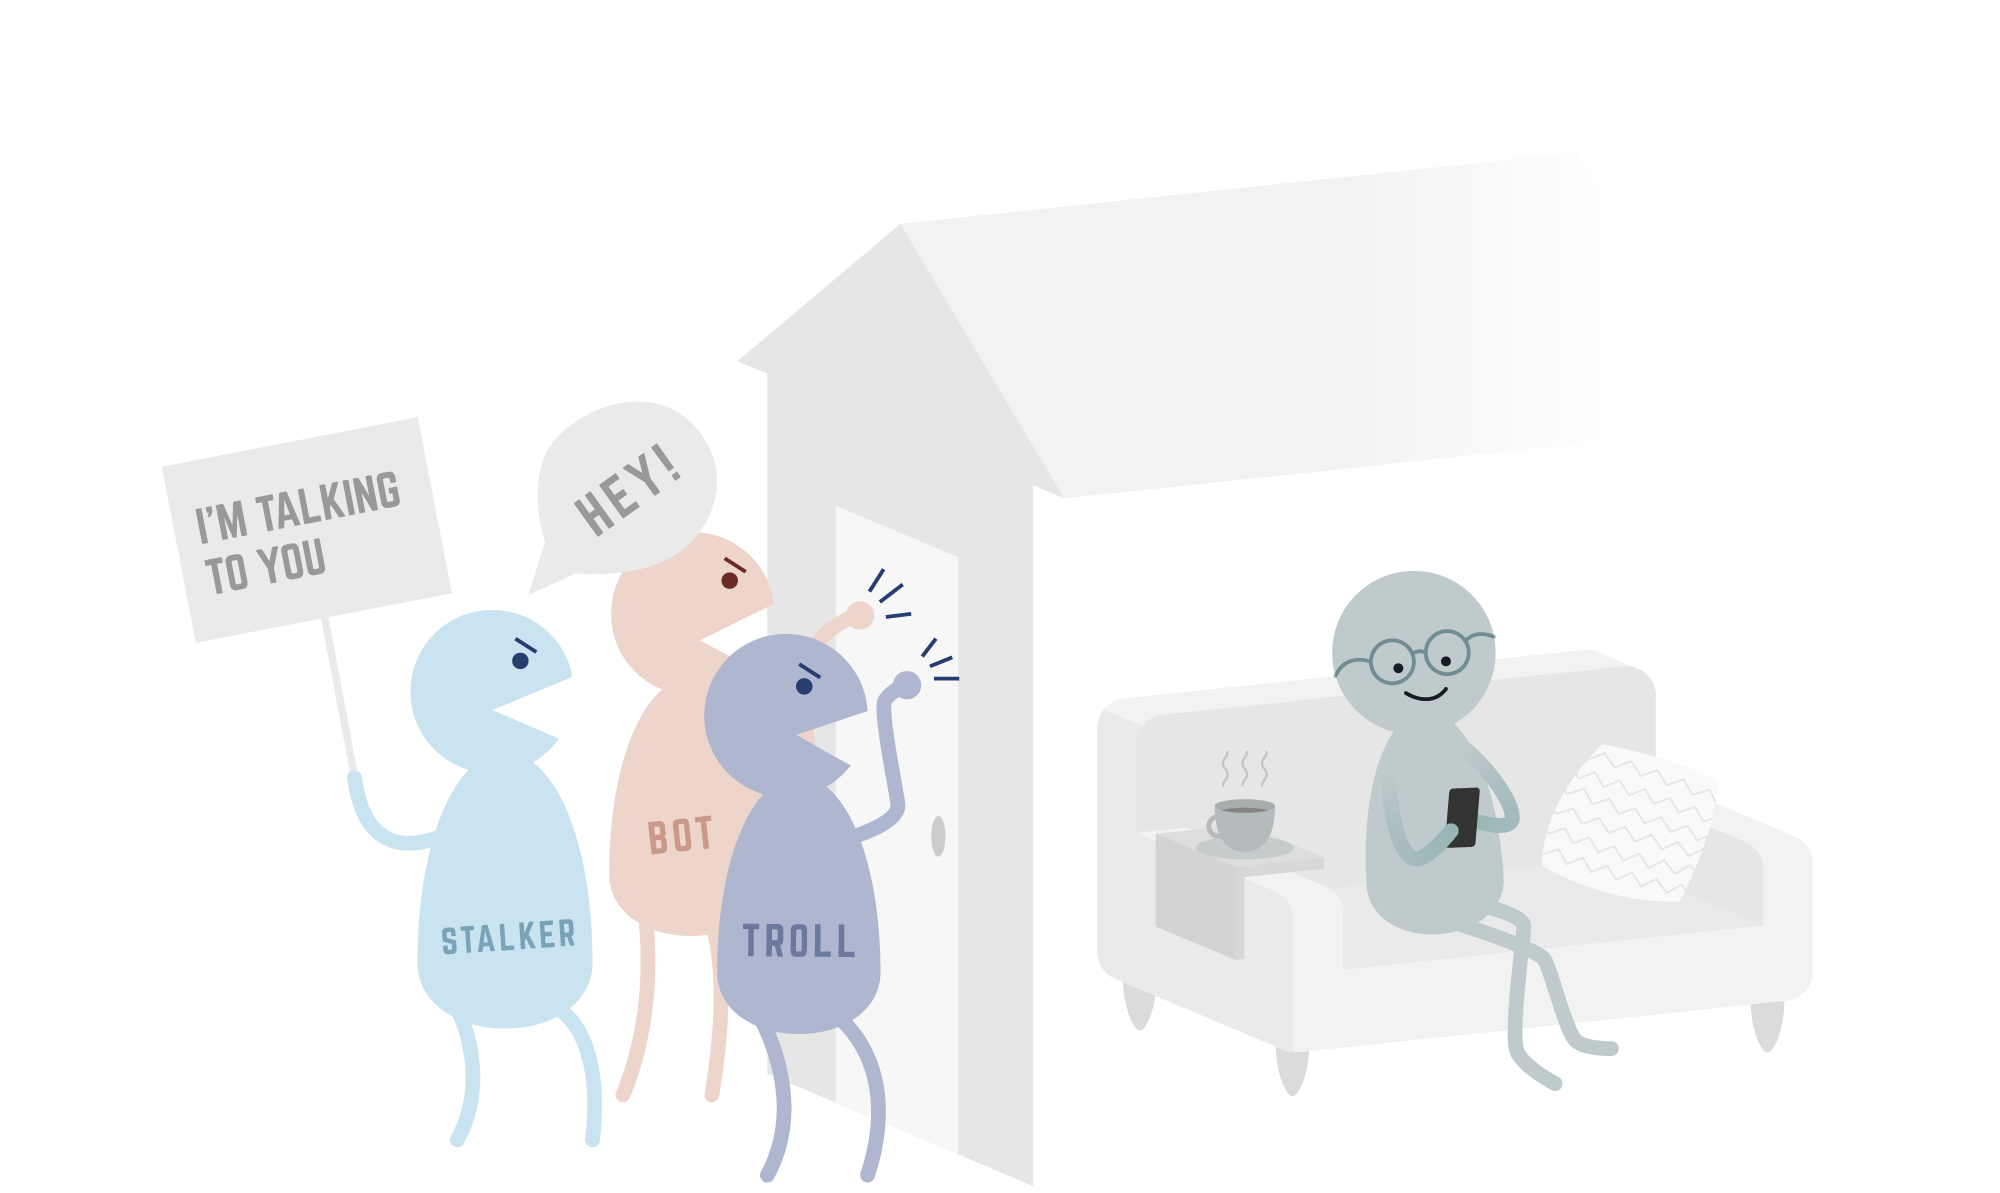 A comic-type graphic showing a happy Block Party user in a secure house, while angry stalkers and trolls knock on the door